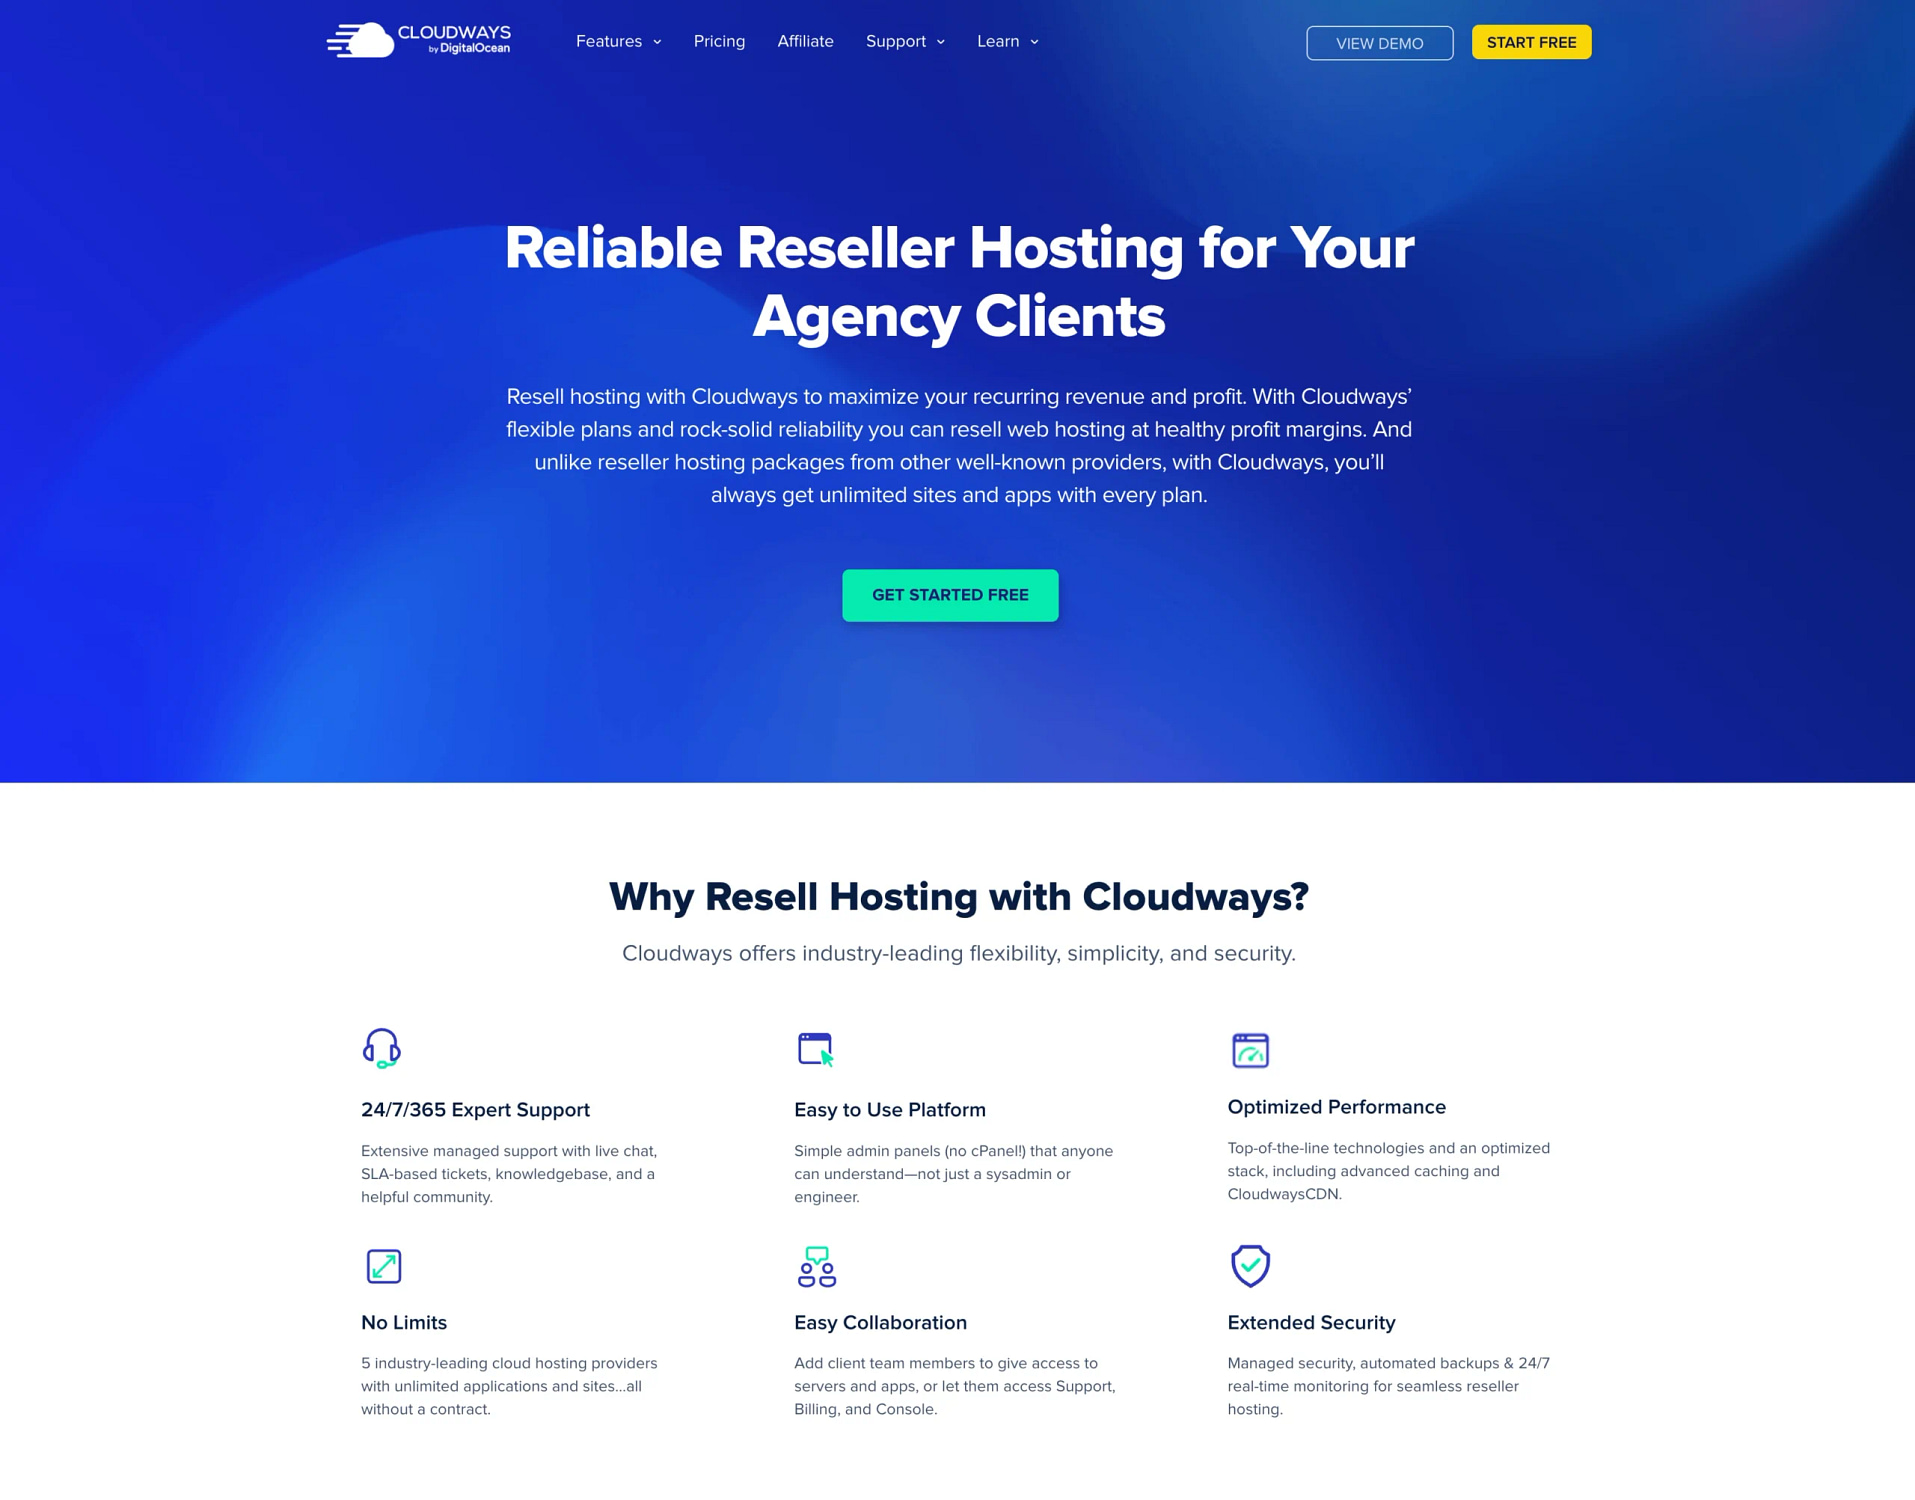 Cloudways Reseller Hosting Page